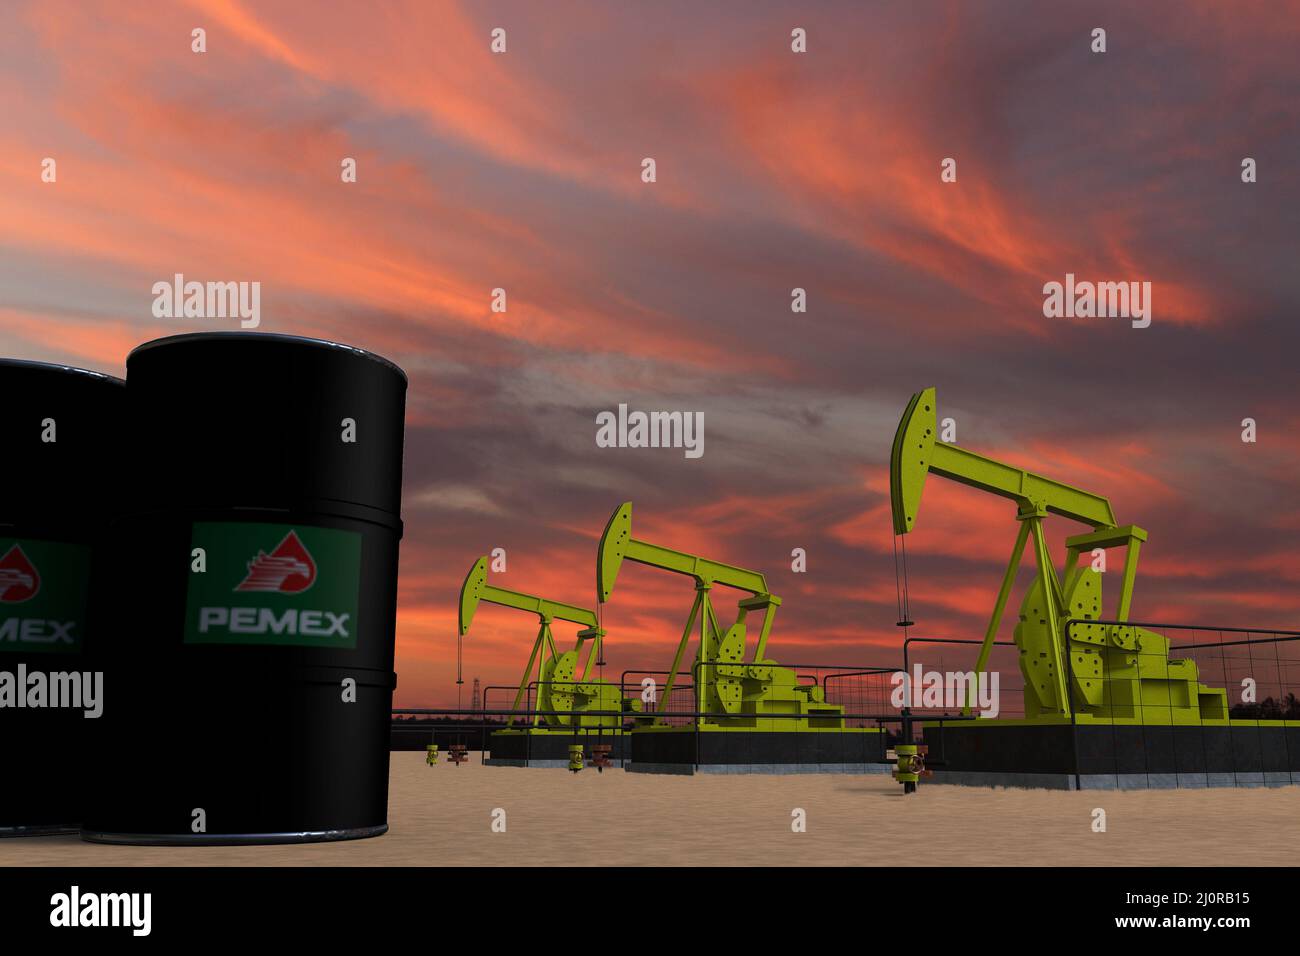 Nice pumpjack oil extraction and cloudy sky in sunset with the PEMEX MEXICO flag on oil barrels 3D rendering Stock Photo